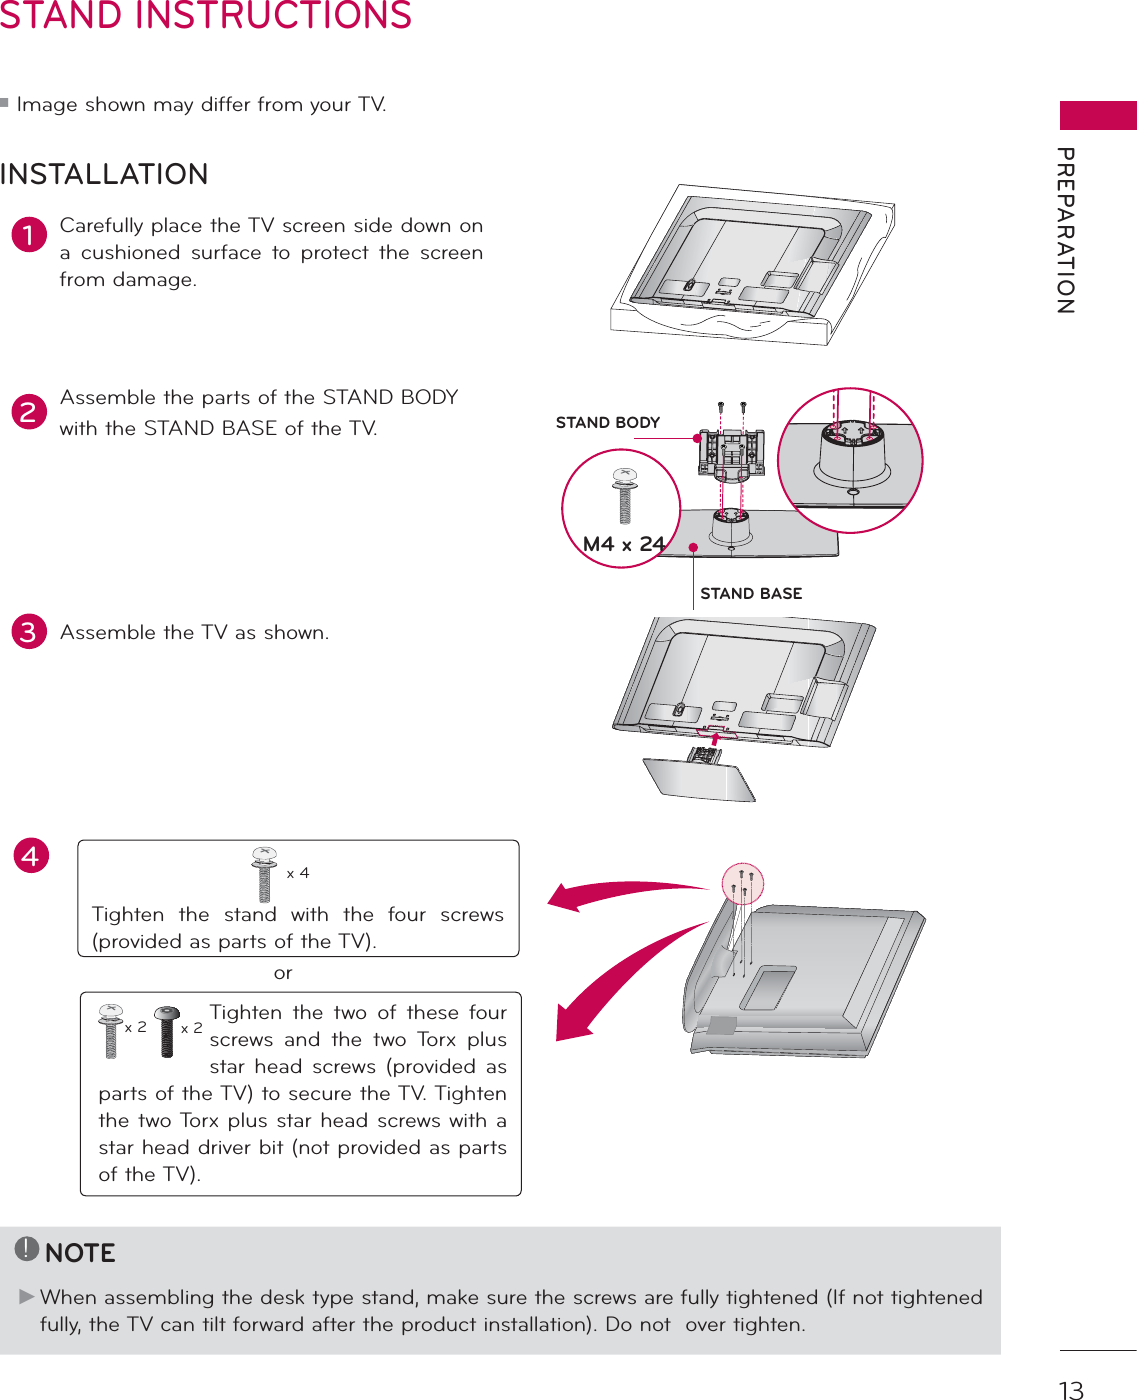 13PREPARATIONSTAND INSTRUCTIONS ᯫImage shown may differ from your TV.1Carefully place the TV screen side down on a cushioned surface to protect the screen from damage.2Assemble the parts of the STAND BODYwith the STAND BASE of the TV.INSTALLATION!NOTEŹ When assembling the desk type stand, make sure the screws are fully tightened (If not tightened fully, the TV can tilt forward after the product installation). Do not  over tighten.3Assemble the TV as shown.Tighten the stand with the four screws (provided as parts of the TV).x 4orTighten the two of these four screws and the two Torx plus star head screws (provided as parts of the TV) to secure the TV. Tighten the two Torx plus star head screws with a star head driver bit (not provided as parts of the TV).x 2 x 2M4 x 24STAND BASESTAND BODYAC  INCABLE  MANAGEMENTAC  INCABLE  MANAGEMENT4